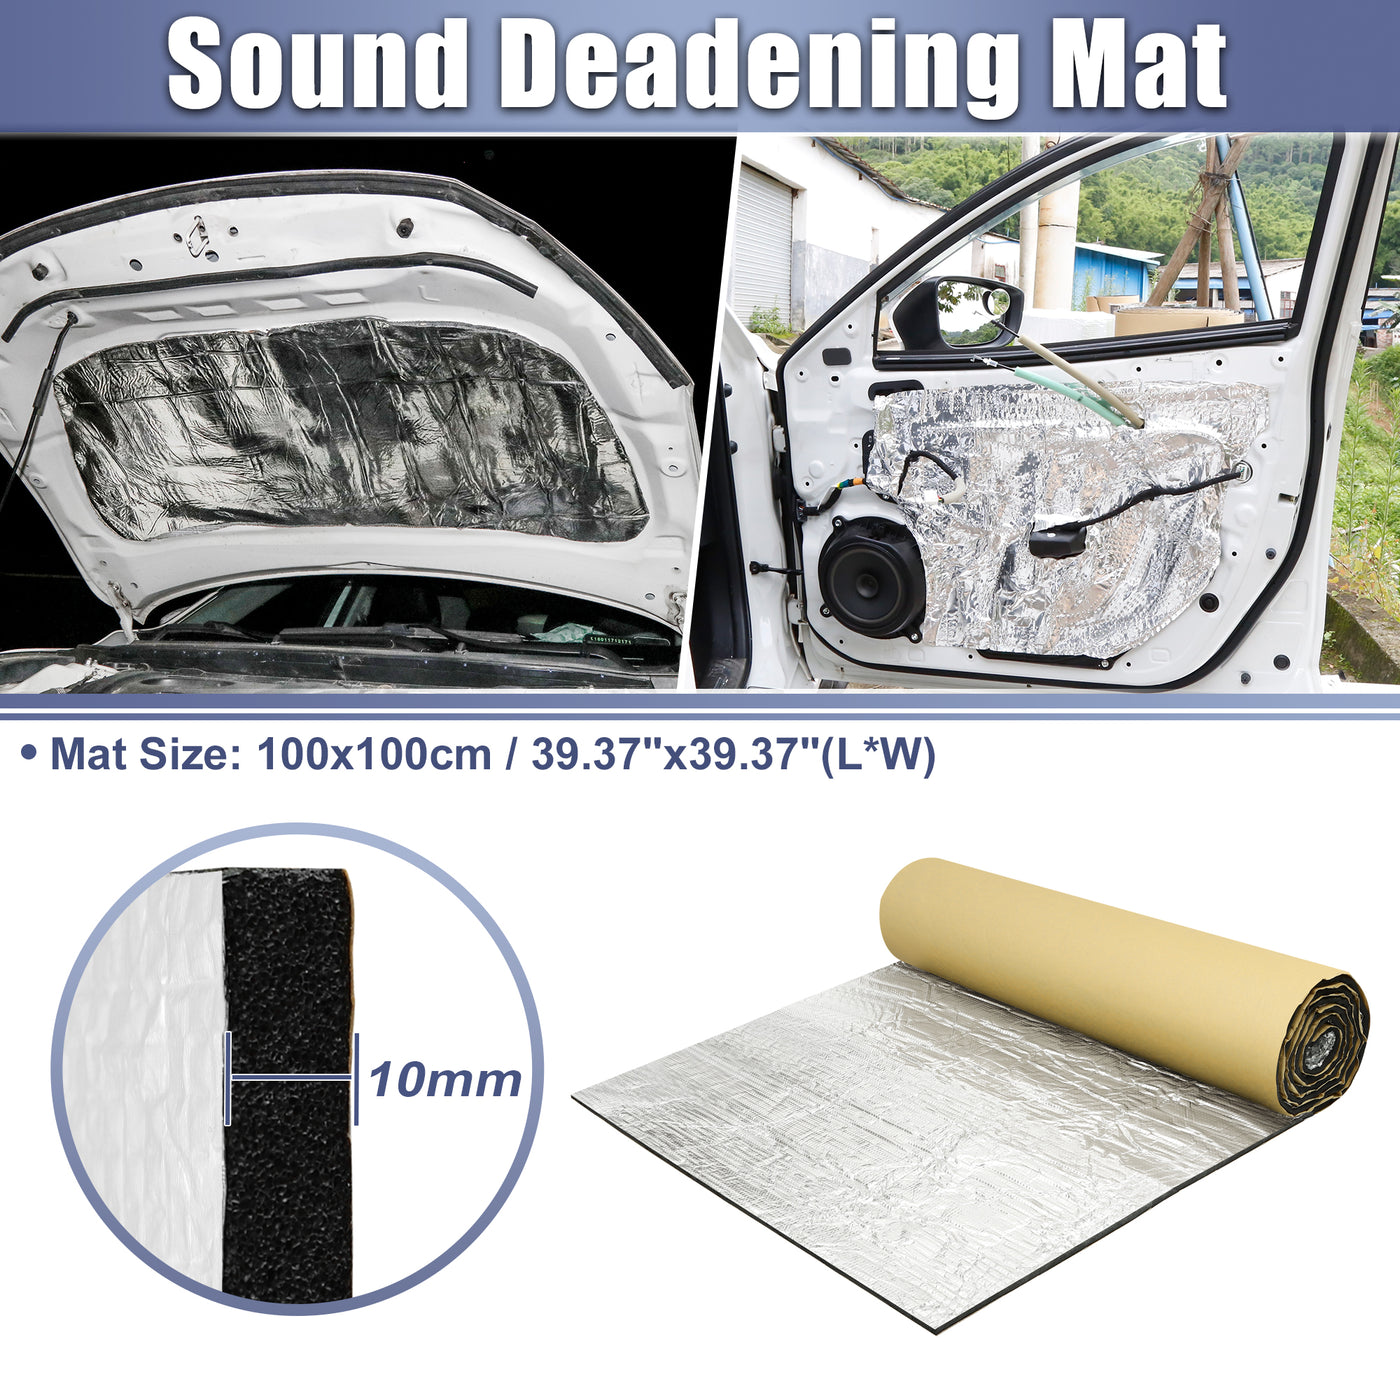 X AUTOHAUX 394mil 10mm 10.76sqft Car Sound Deadening Mat Aluminum Closed Cell Foam Heat Shield Material Damping Self Adhesive Universal for Hood Fender and Boat Engine Cover 39.37"x39.37"